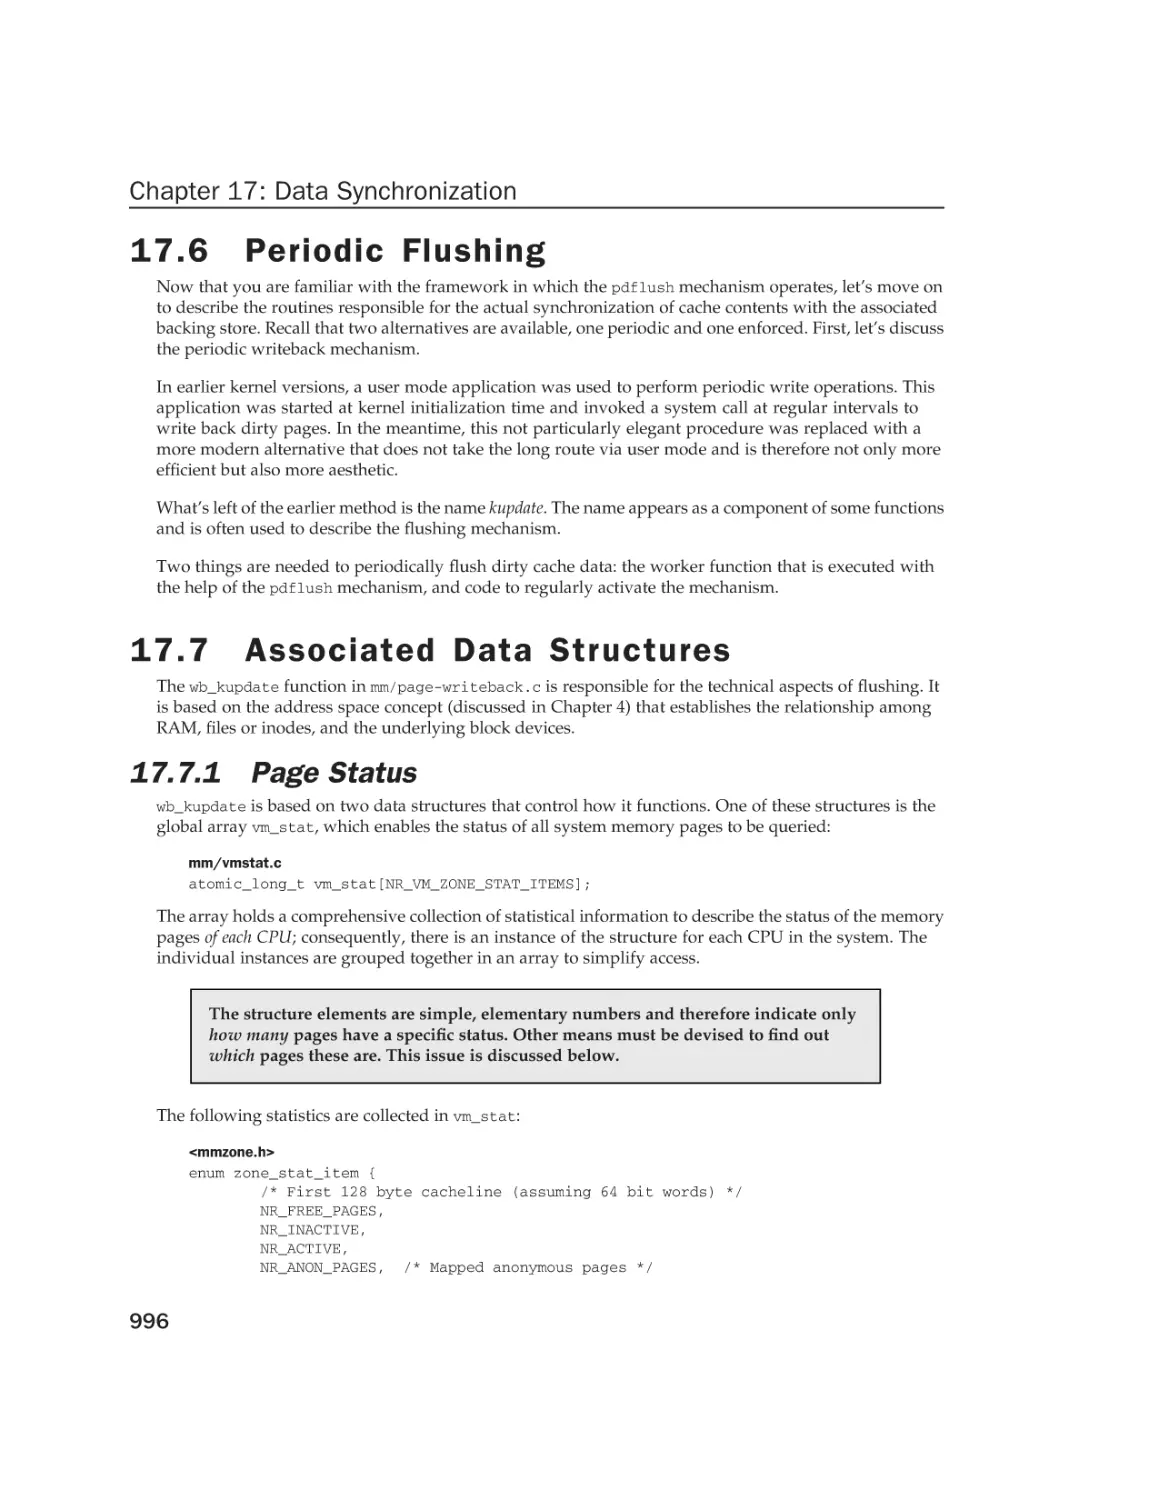 17.6 Periodic Flushing
17.7 Associated Data Structures